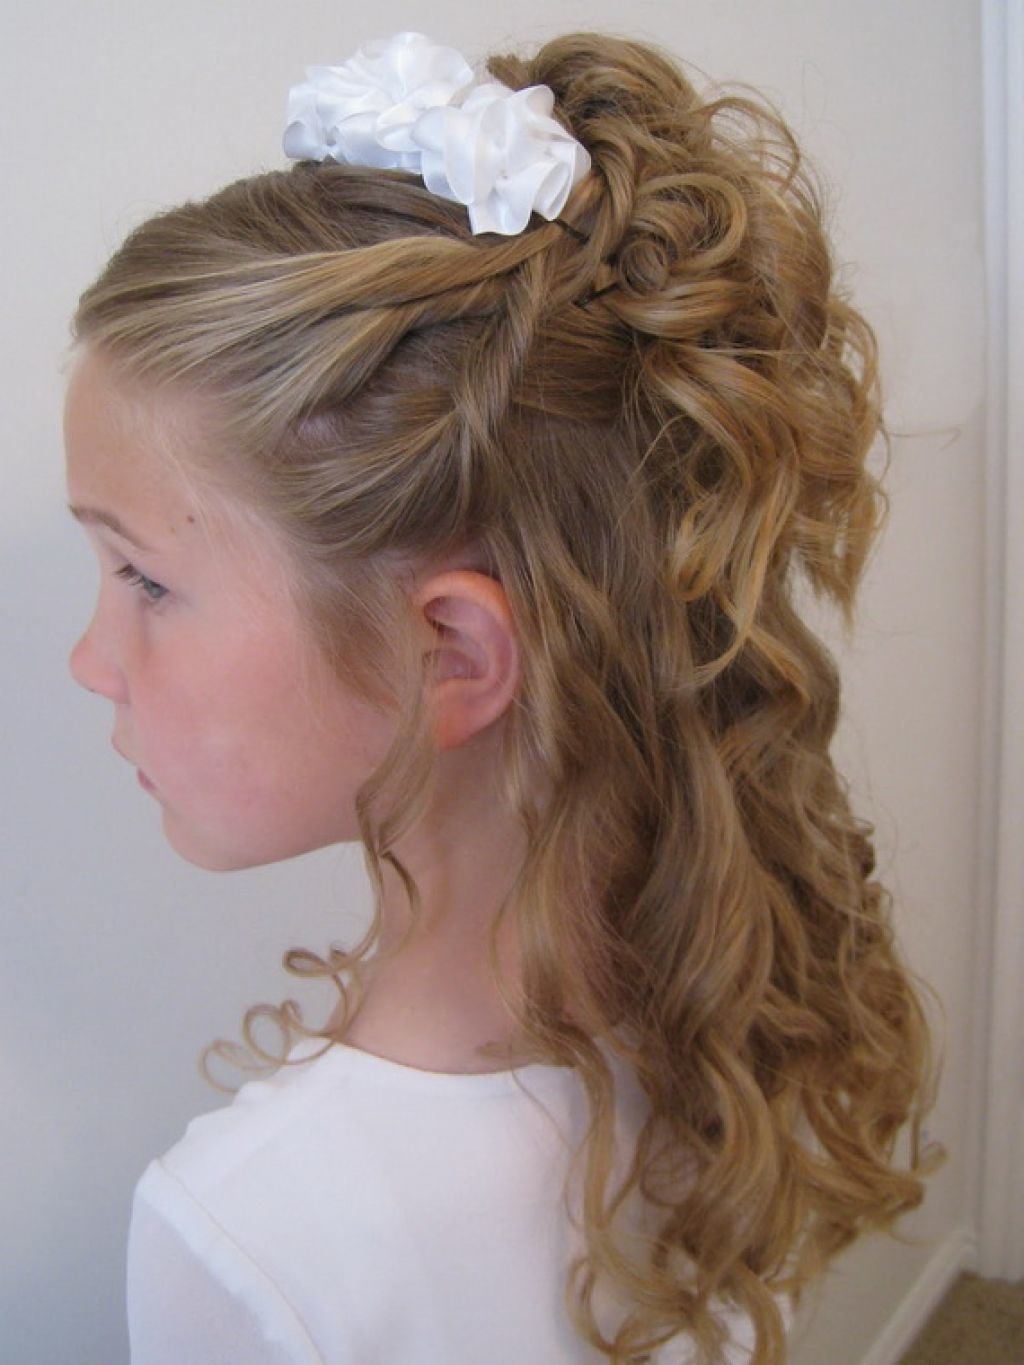 Simple And Fashionable Hairstyles For School 8 Elegant Ideas